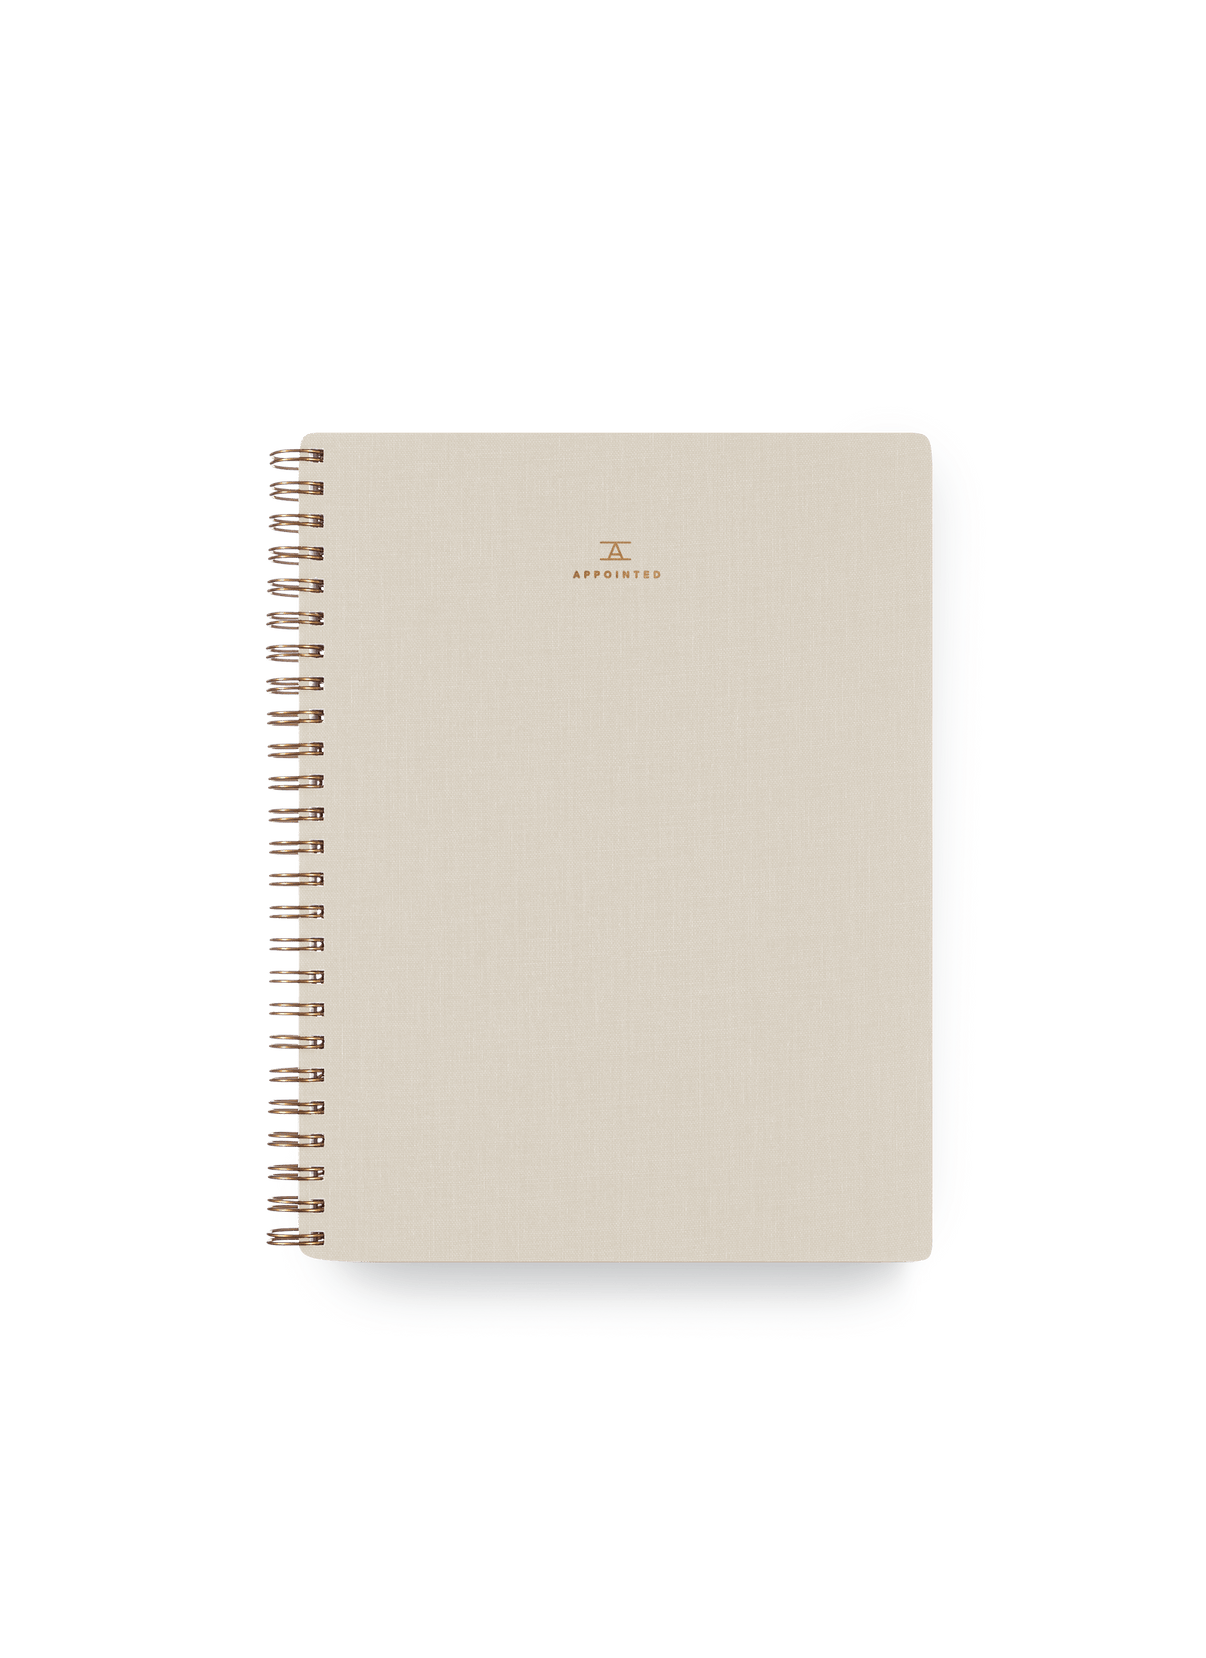 Appointed Workbook in Natural Linen bookcloth with brass wire-o binding front cover || Natural Linen